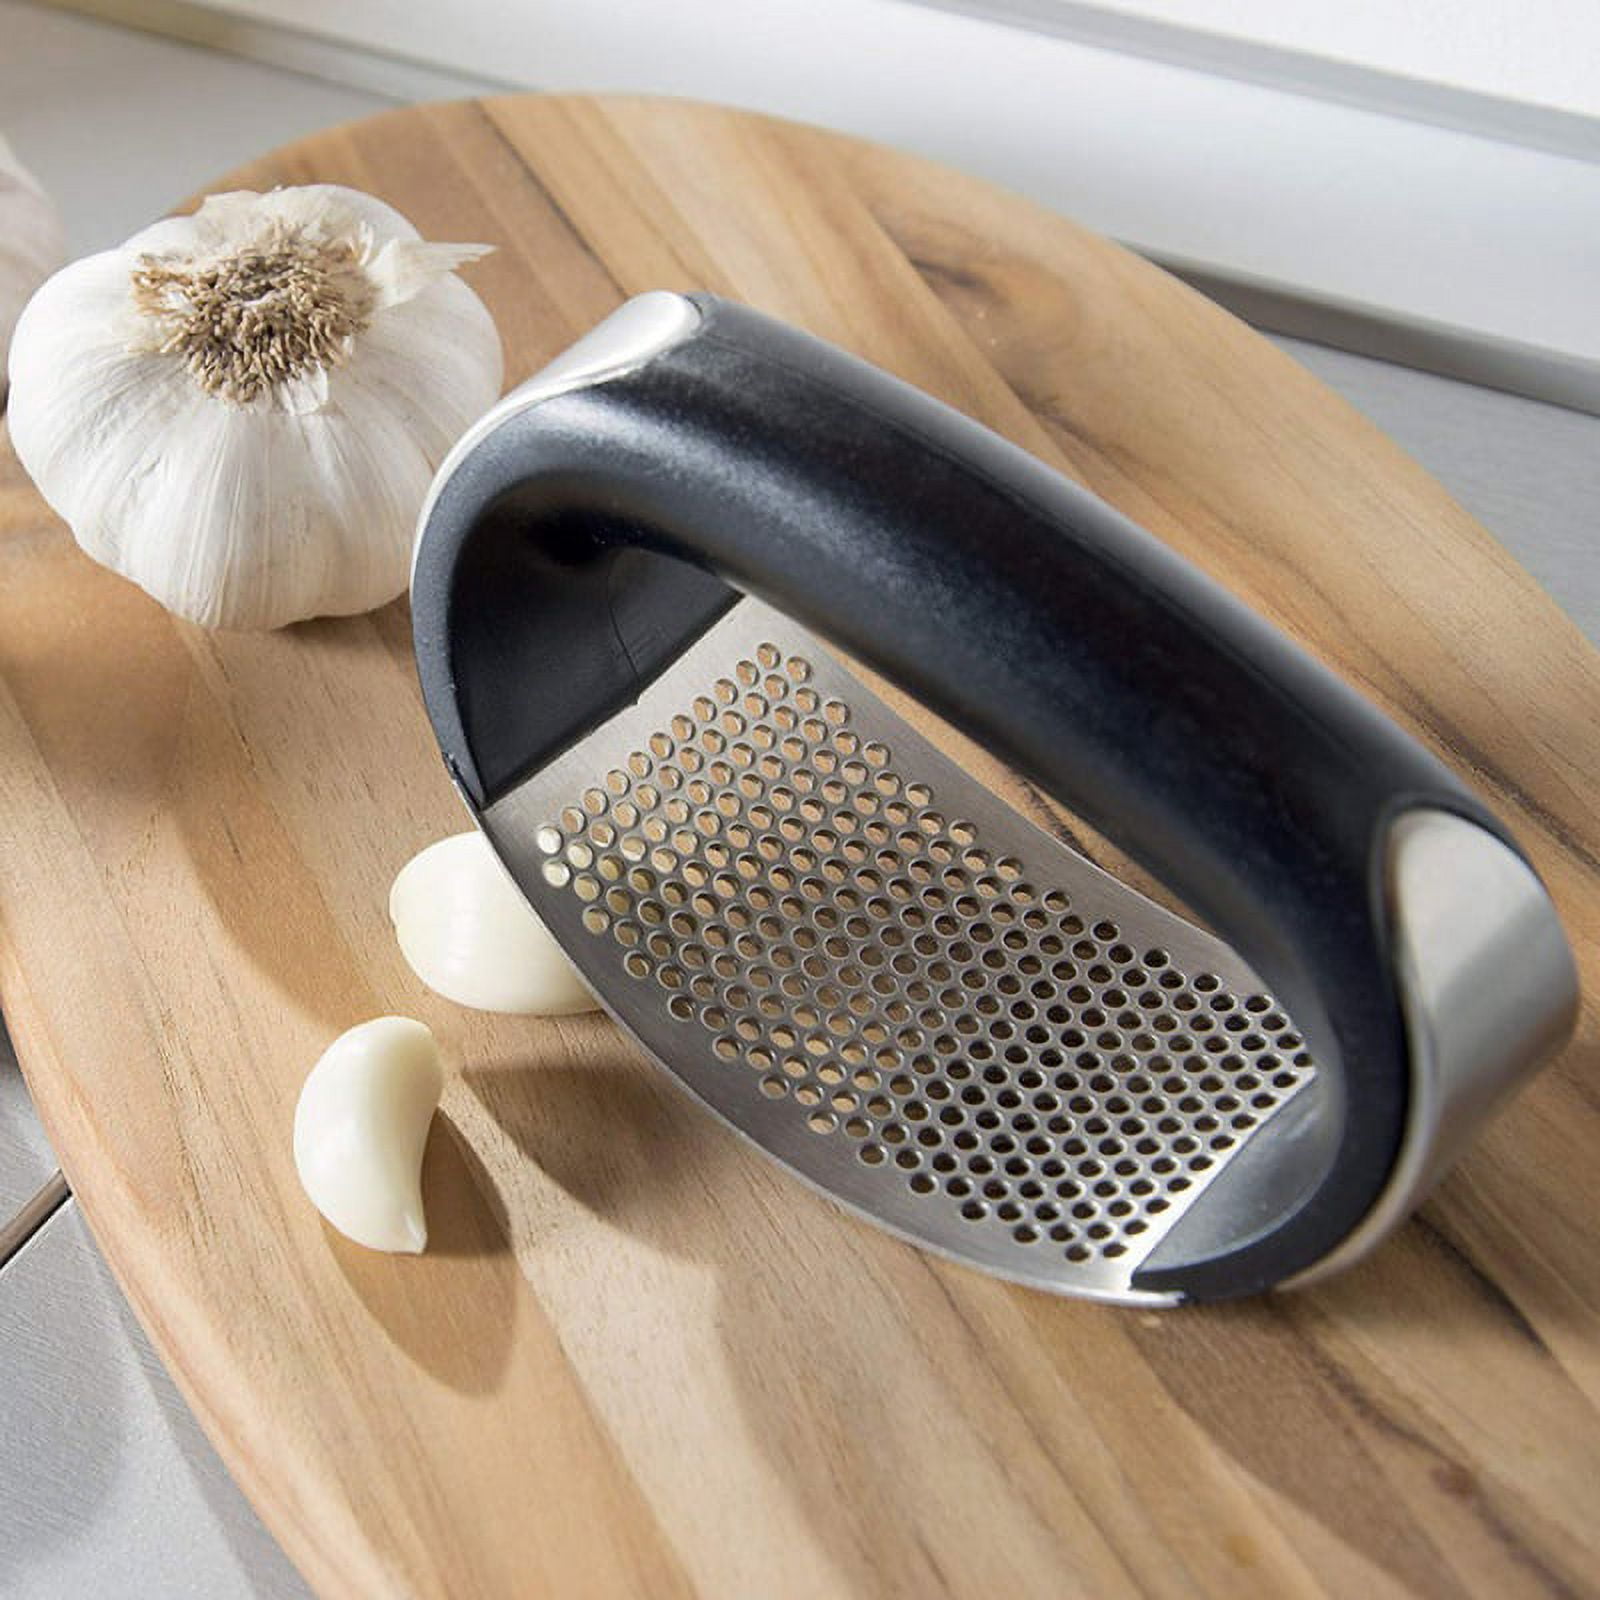  Pam Chef Professional Garlic Press, Garlic Mincer Easy-squeeze  Ergonomic Handle, No Need To Peel, Rust Proof, Professional Ginger Press & Garlic  Crusher with Handy Cleaning Brush- Dishwasher Safe: Home & Kitchen